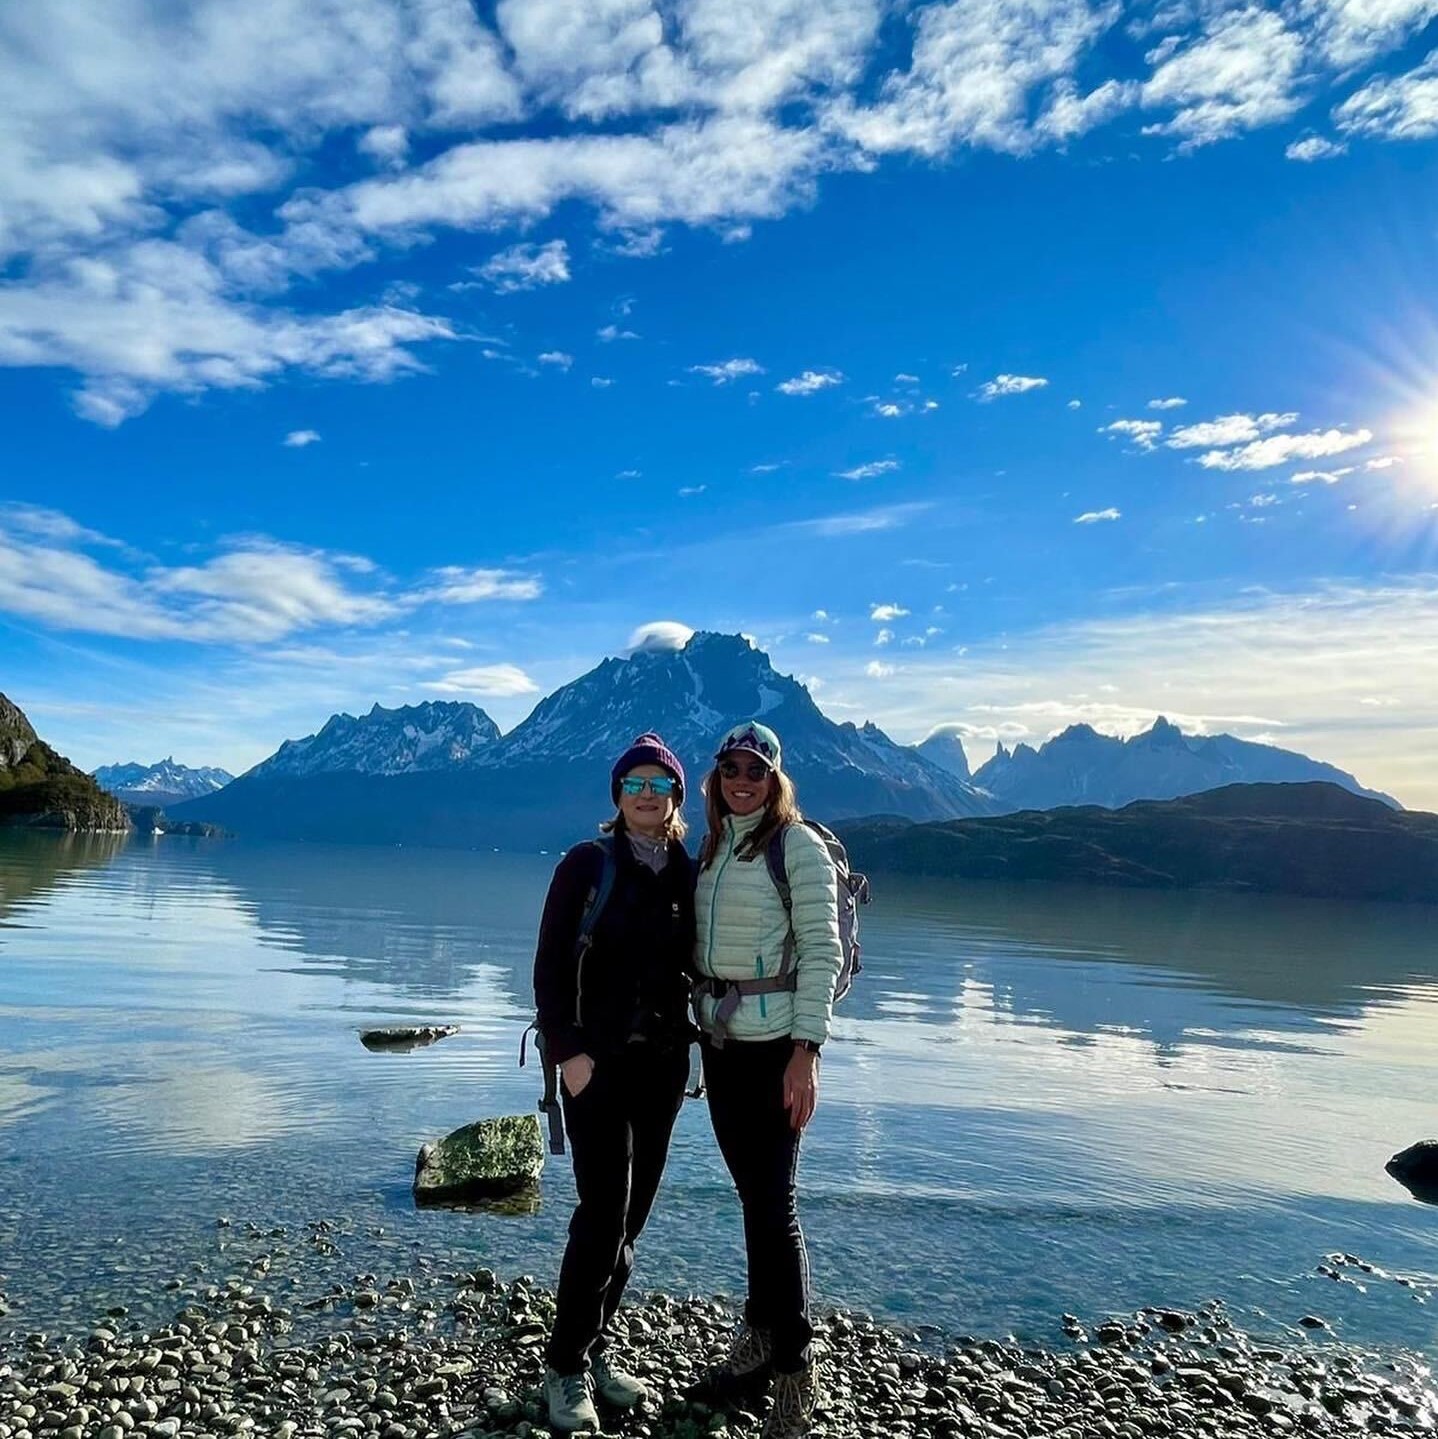 Two women on an adventure travel experience, standing in front of a scenic lake with majestic mountains in the background.